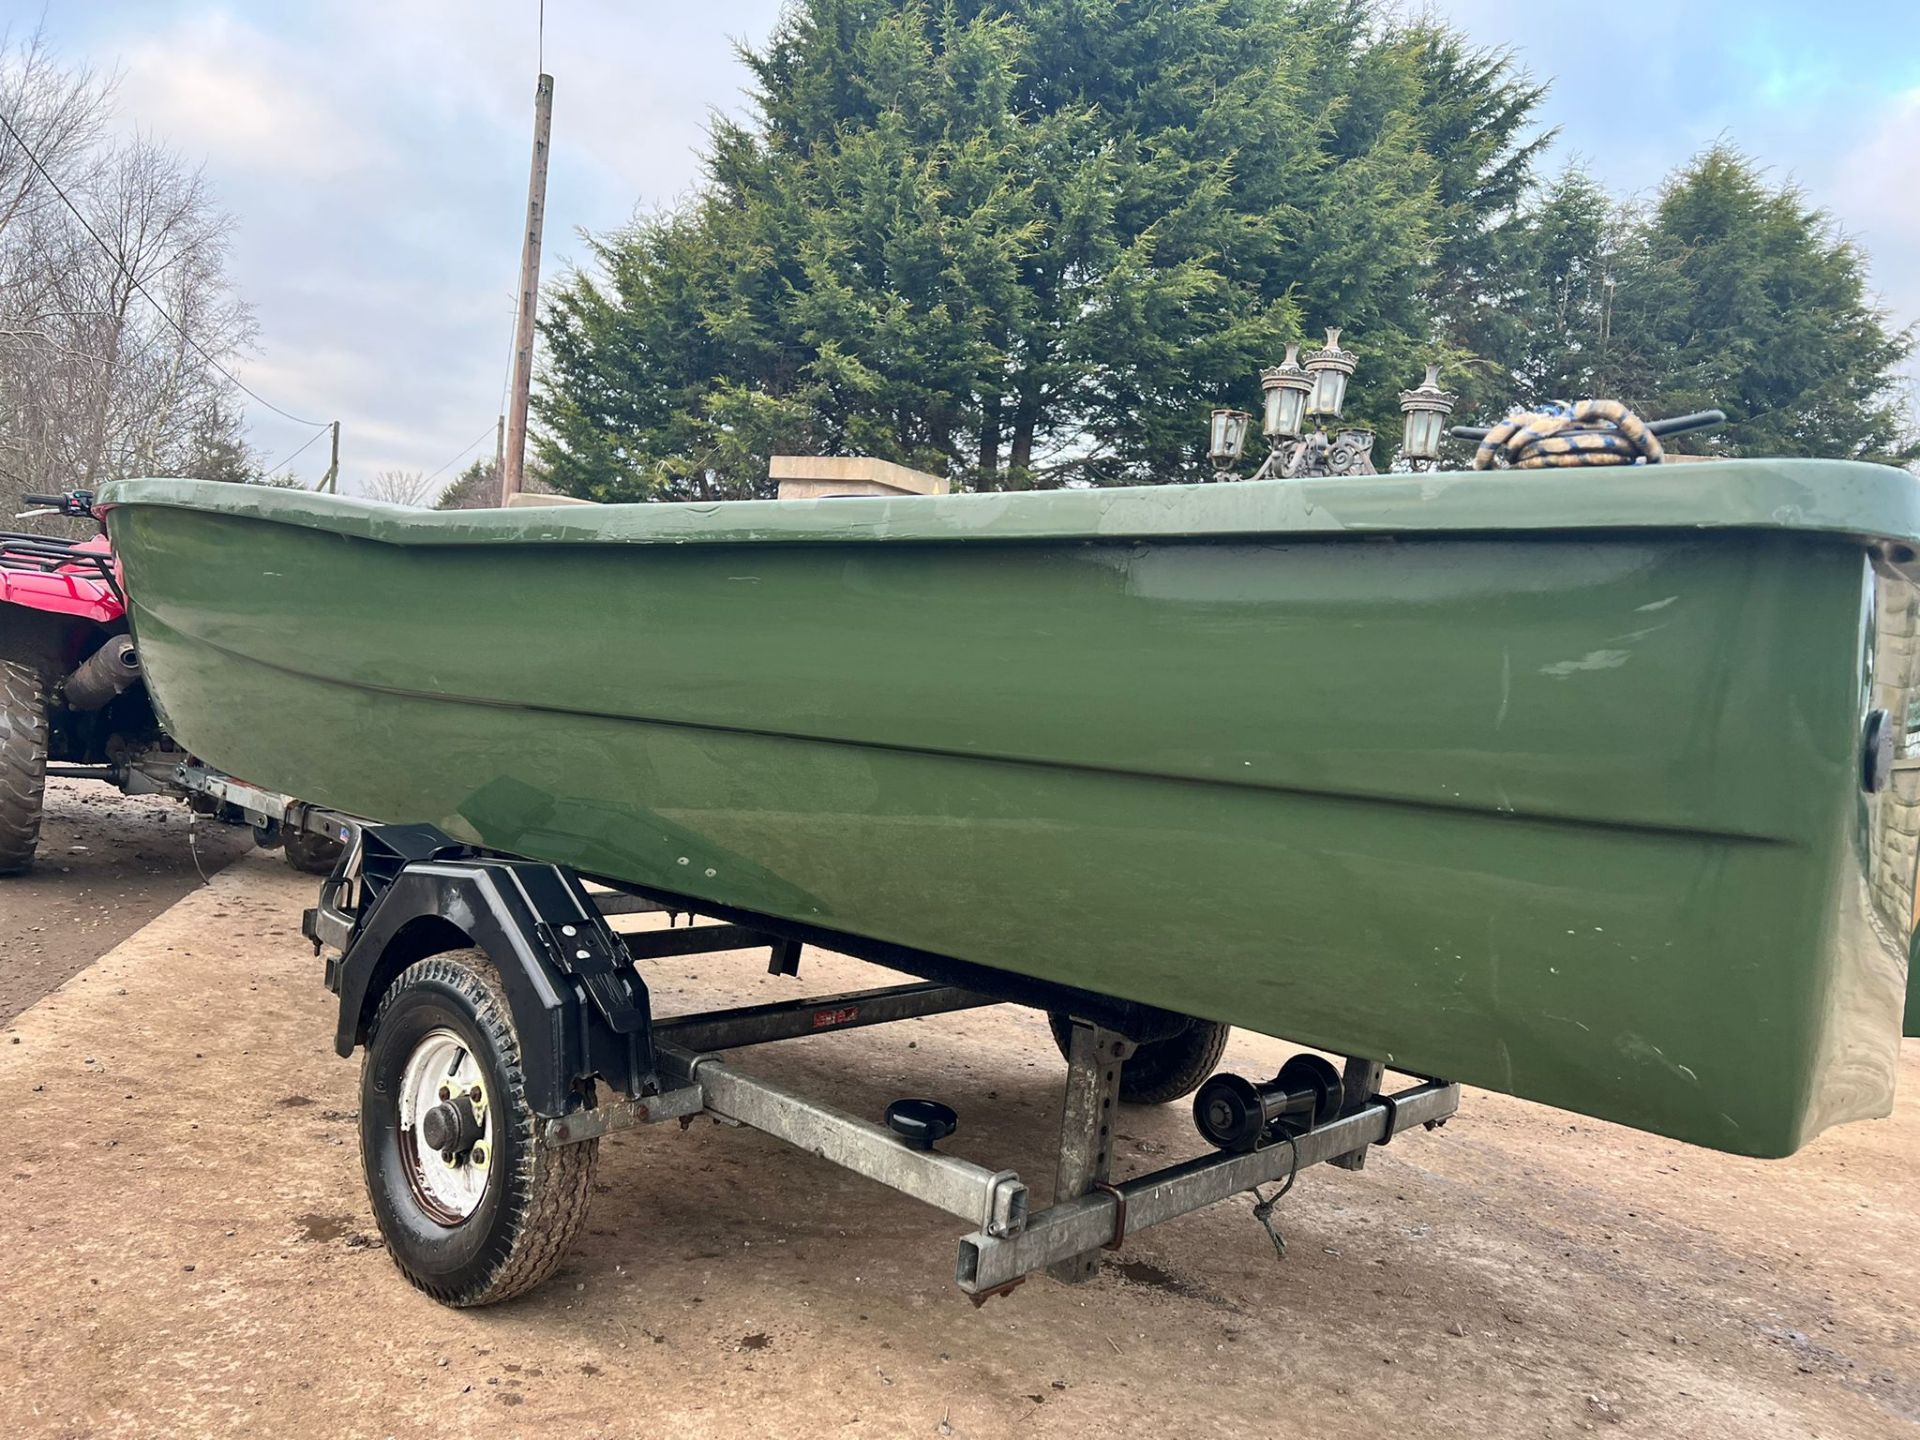 RIGFLEX AQUAPECHE 370 BOAT ON INDESPENSION MERIT SINGLE AXEL SPORT BOAT TRAILER WITH WINCH *PLUS VAT - Image 8 of 13